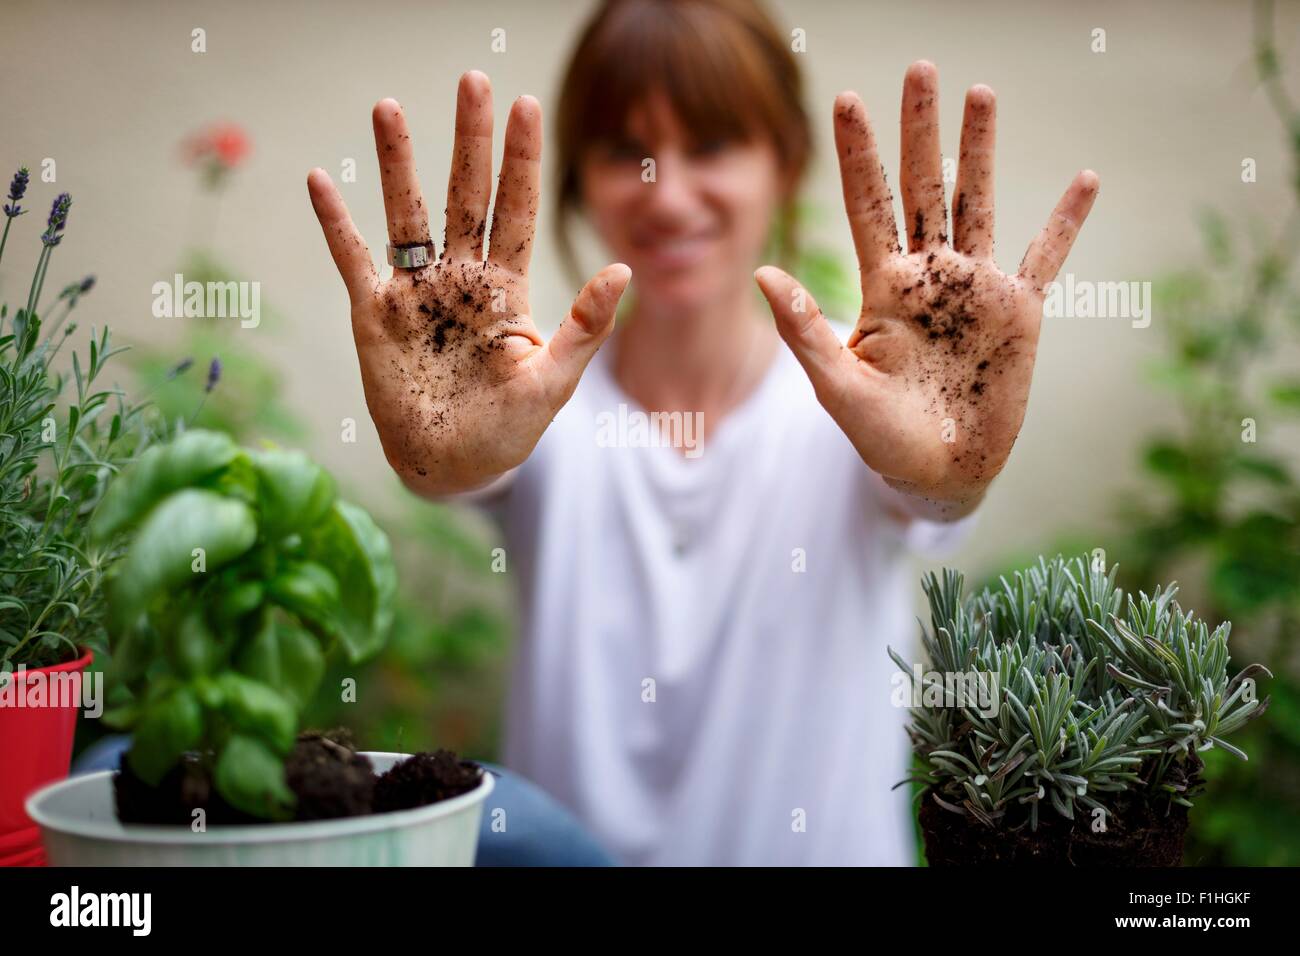 Mid adult woman holding soil covered hands up Stock Photo